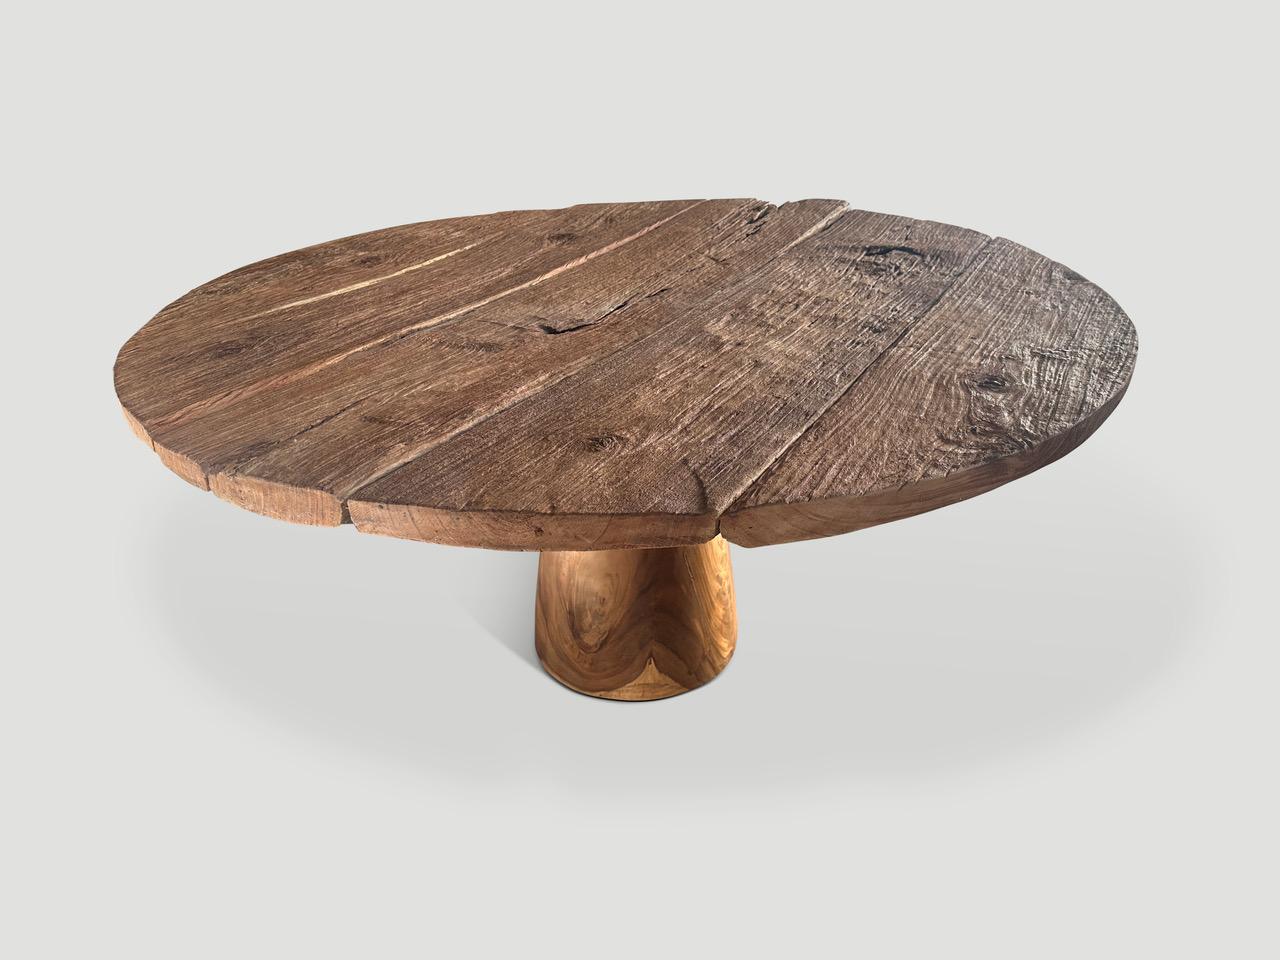 Reclaimed thick teak wood panels are joined together by hand to produce this impressive round table. A solid cylinder suar wood base allows the top to float. Great as a dining table or entrance table. Finished with a wire brush and natural oil